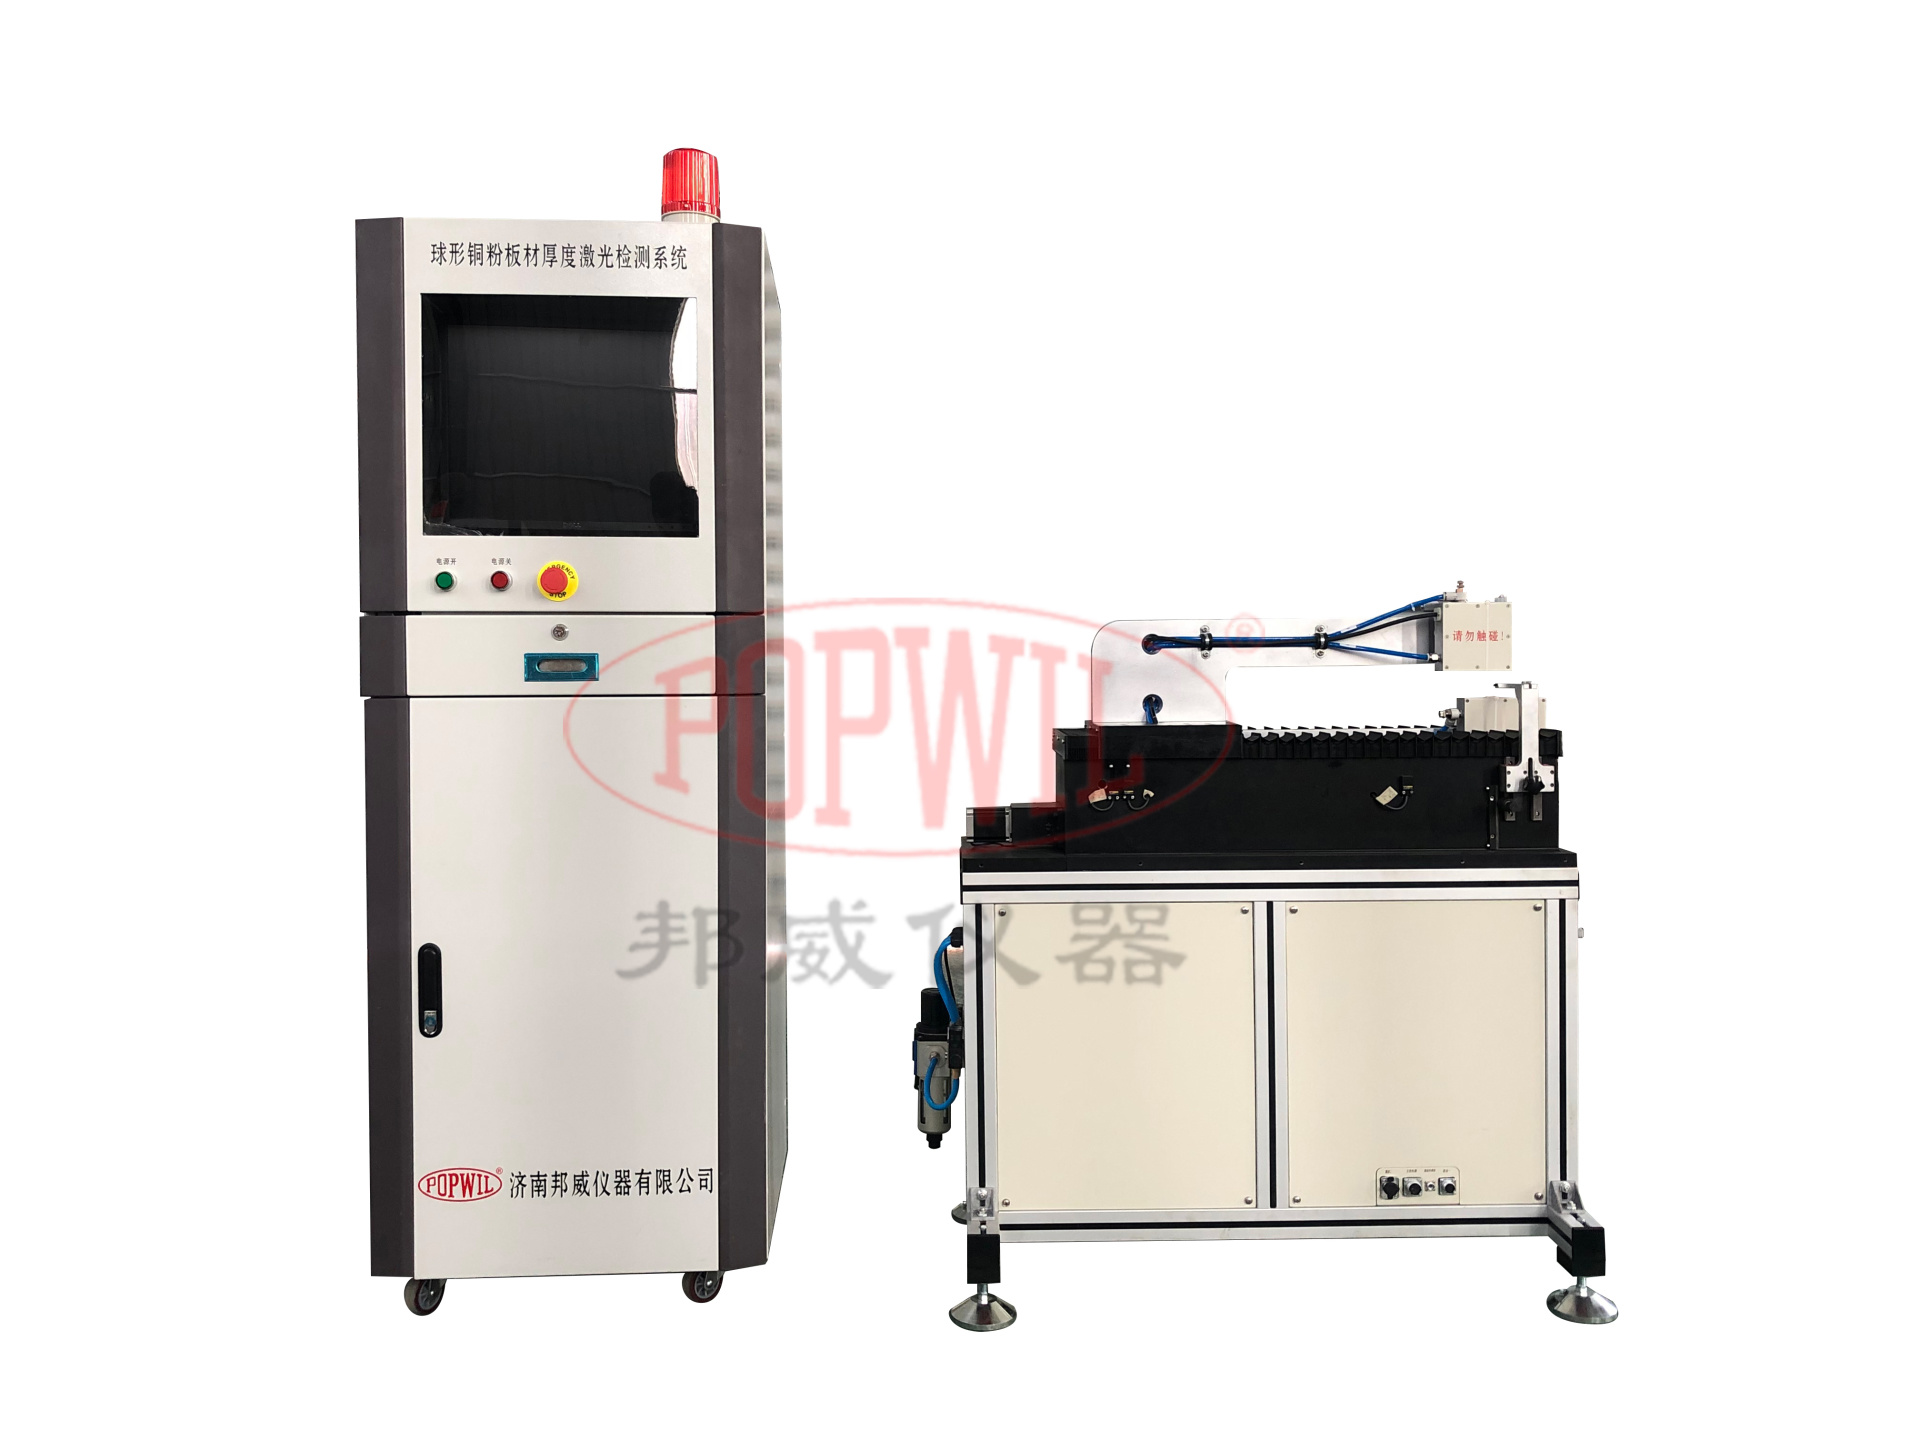 Production line thickness laser detection system (oil hole plate)